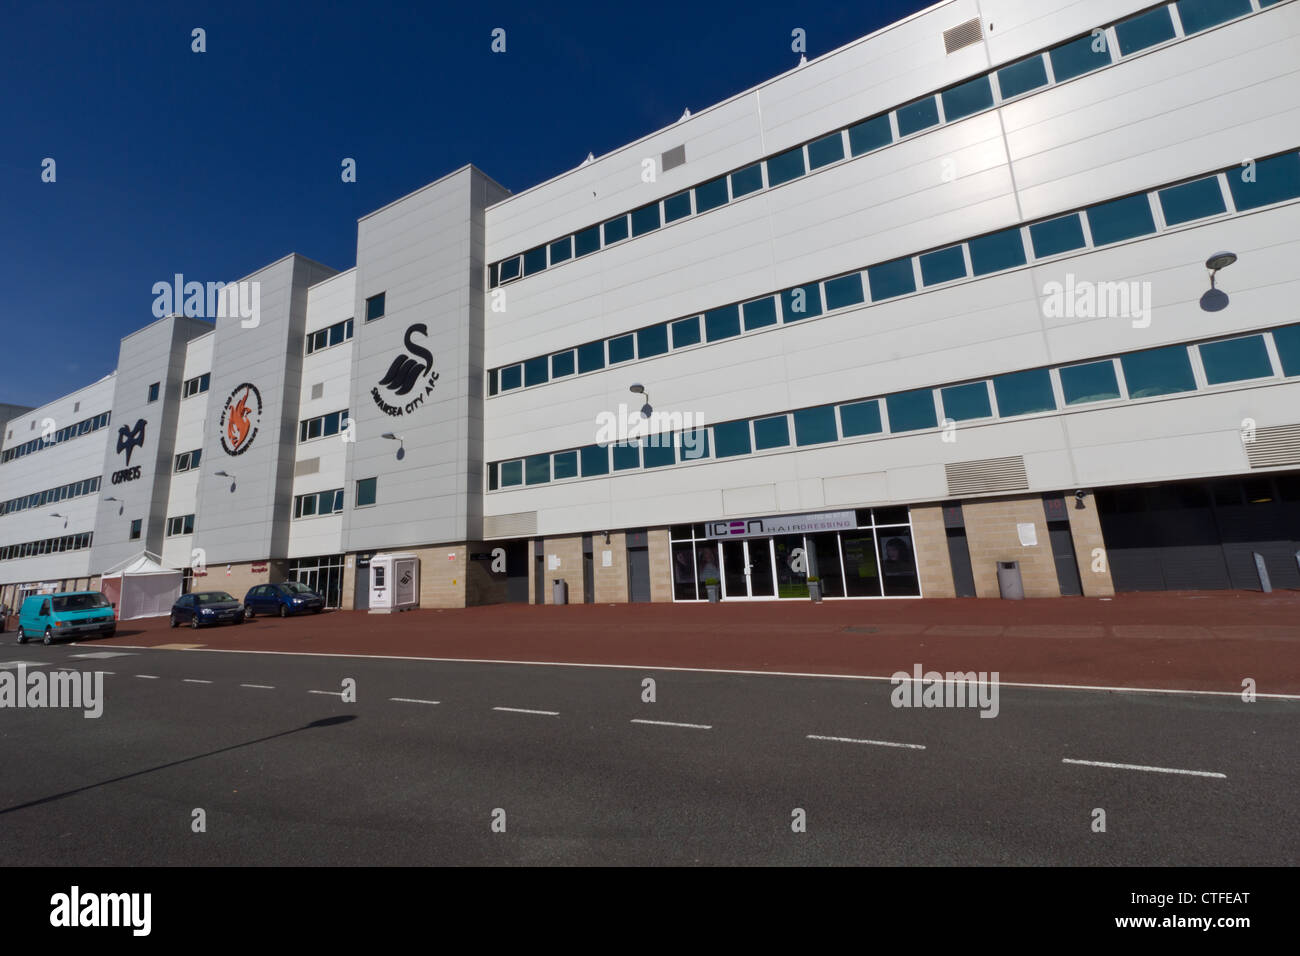 Liberty Stadium, home of the Ospreys rugby team and the Swans, Swansea City FC Stock Photo